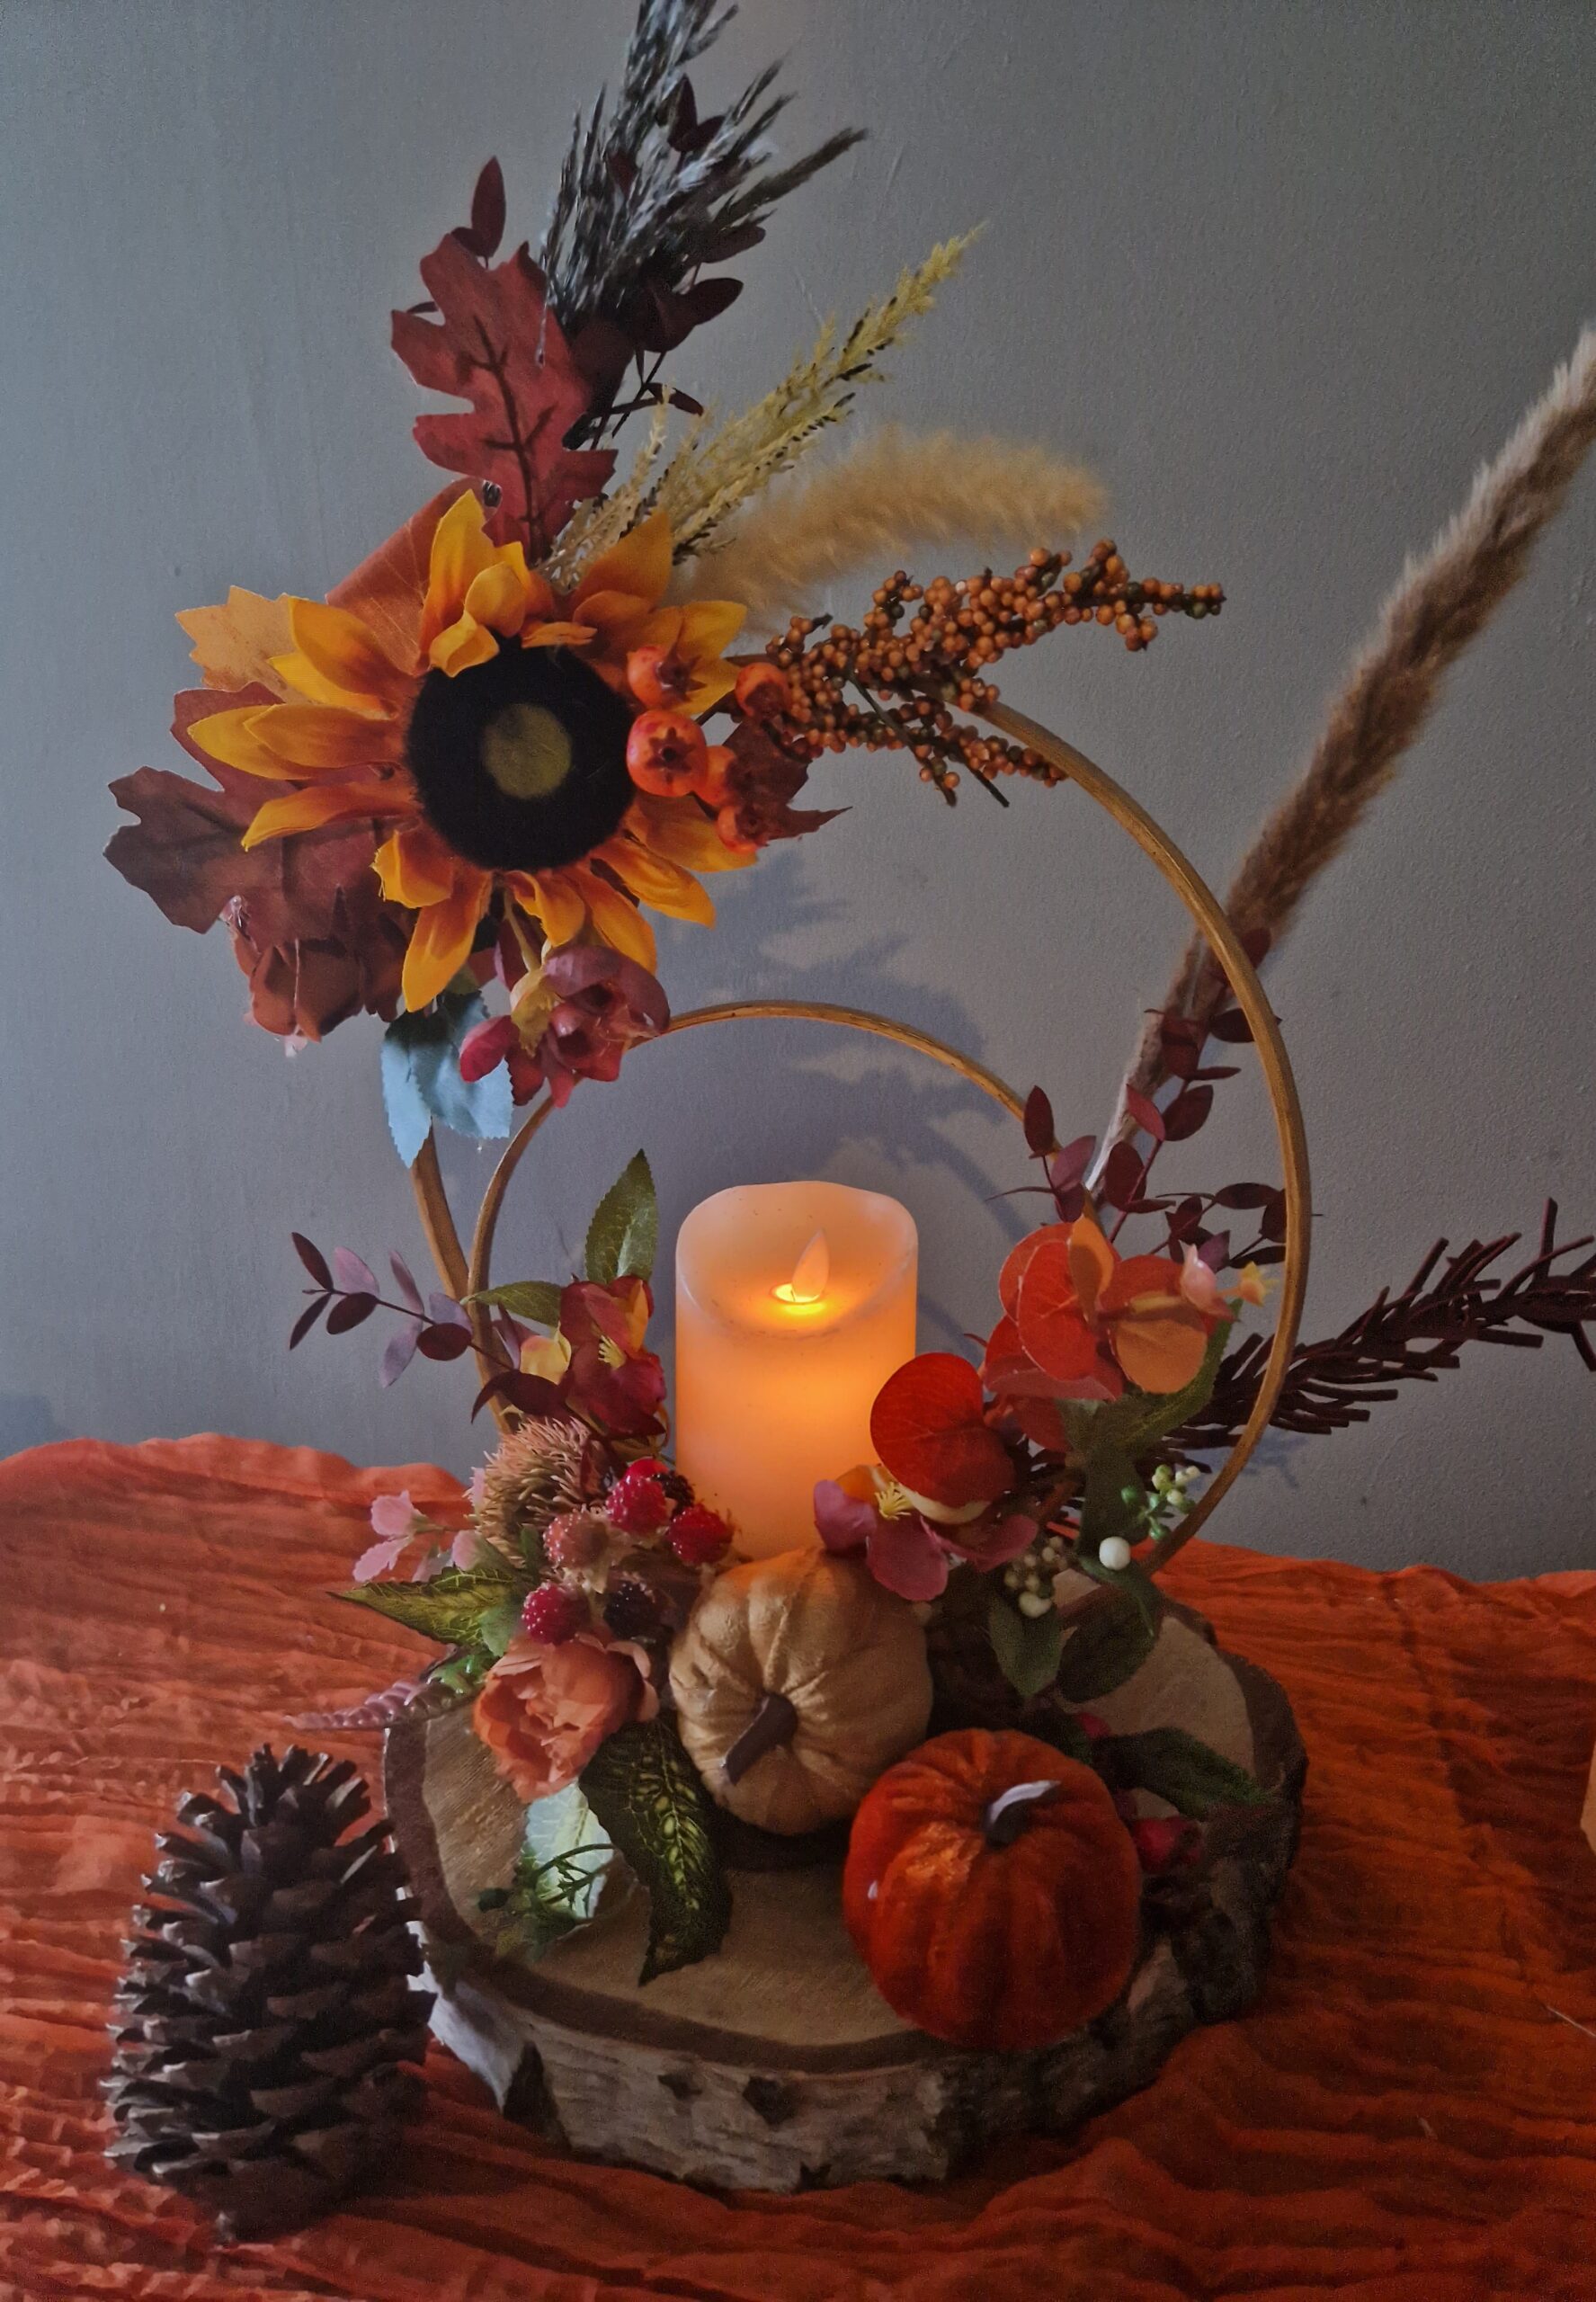 Harvest Moon centrepiece, wooden hoops on a log slice, decorated with autumn colour flowers